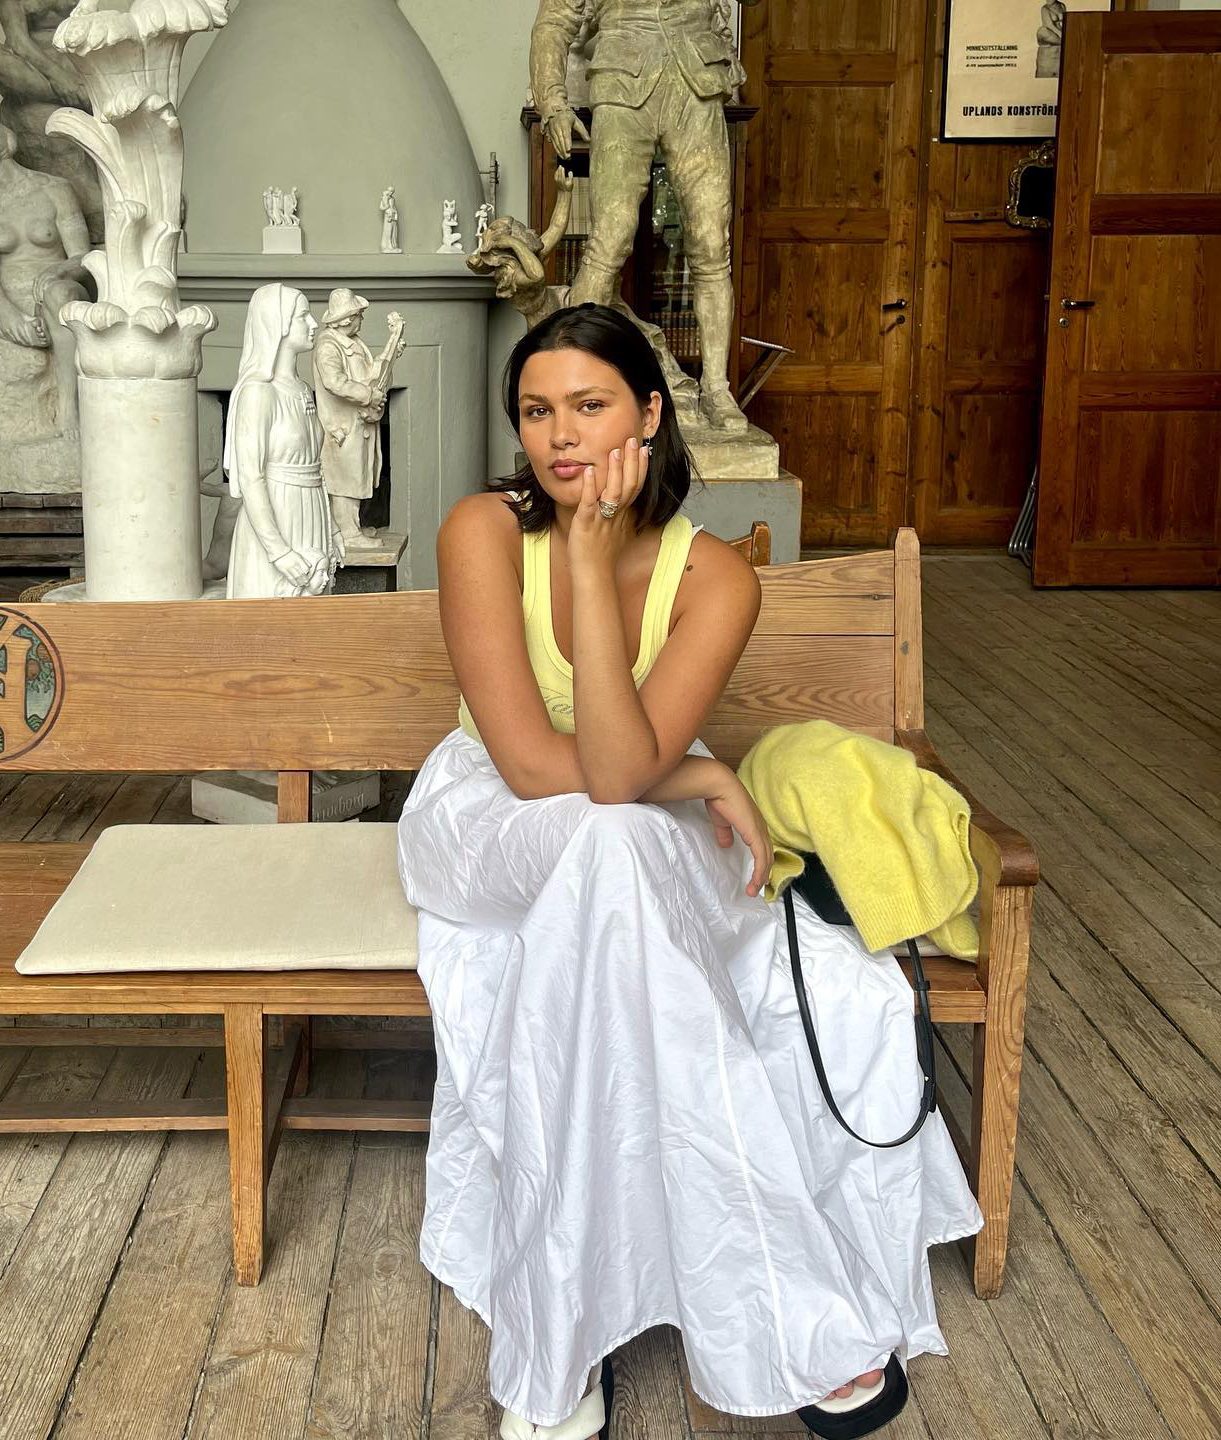 Cotton Skirt Trend: @isabellecoheen wears a white cotton skirt with a yellow top whilst sitting in an art gallery